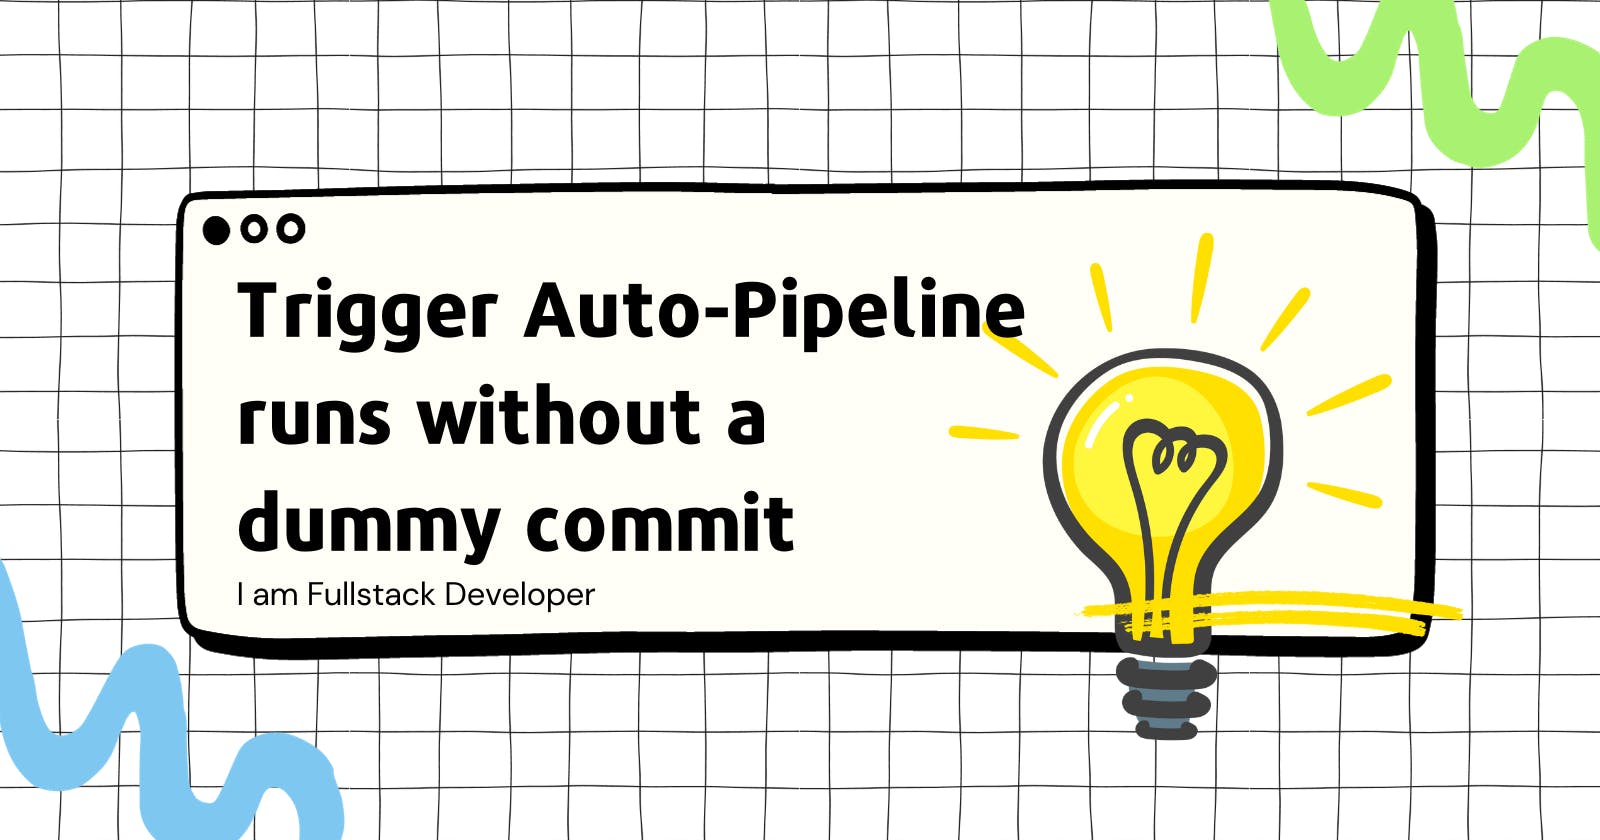 Trigger Auto-Pipeline runs without a dummy commit